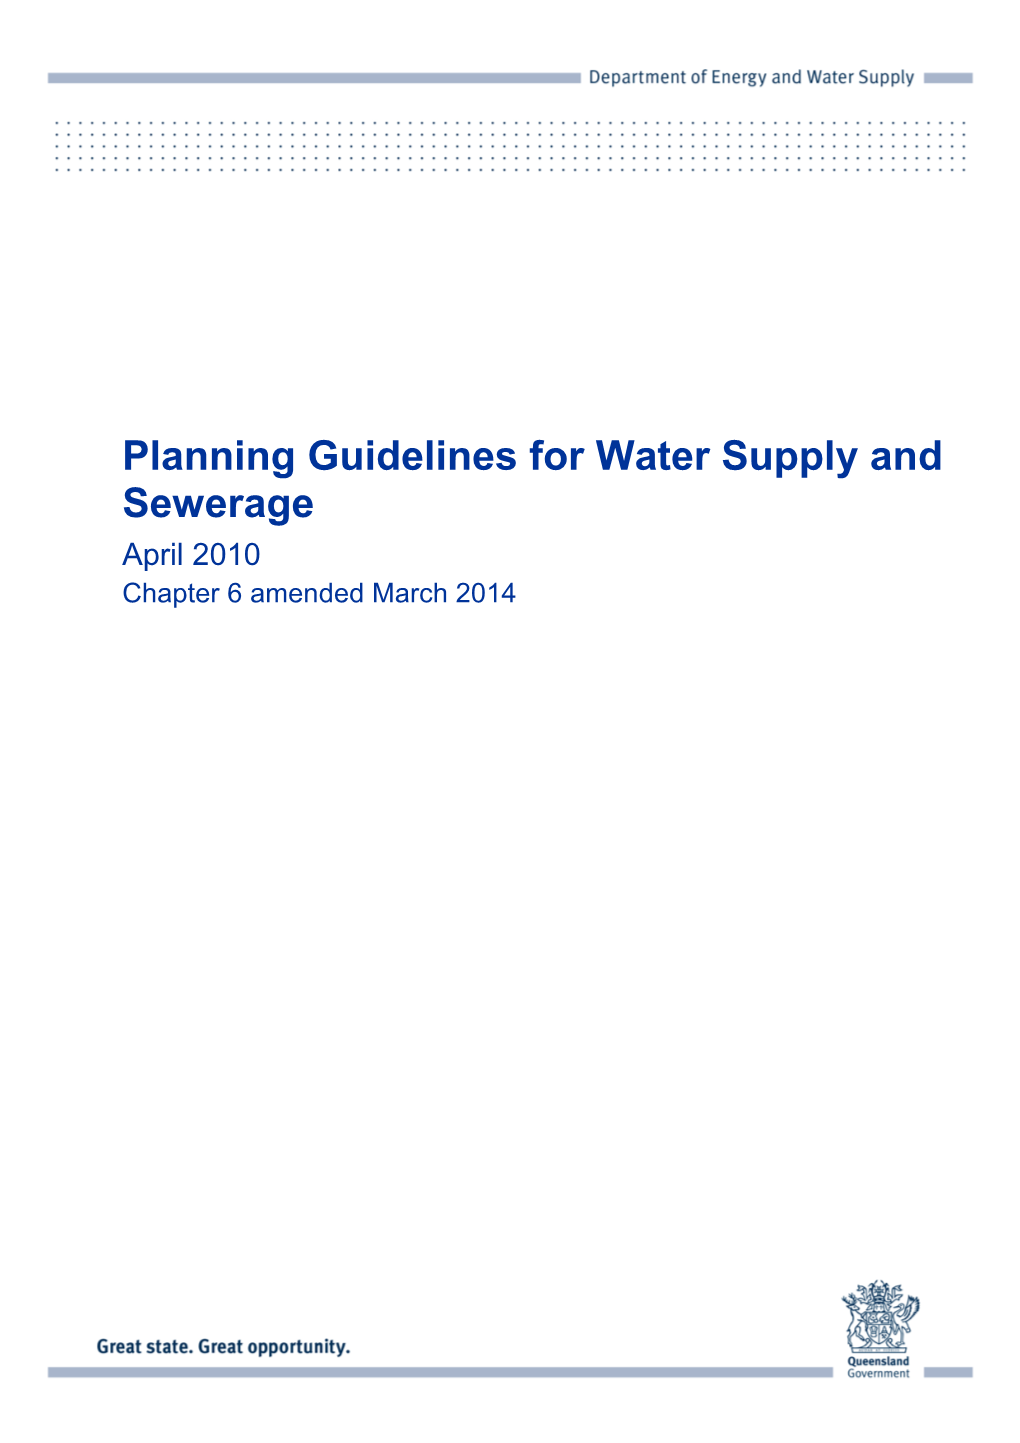 Planning Guidelines for Water Supply and Sewerage April 2010 Chapter 6 Amended March 2014